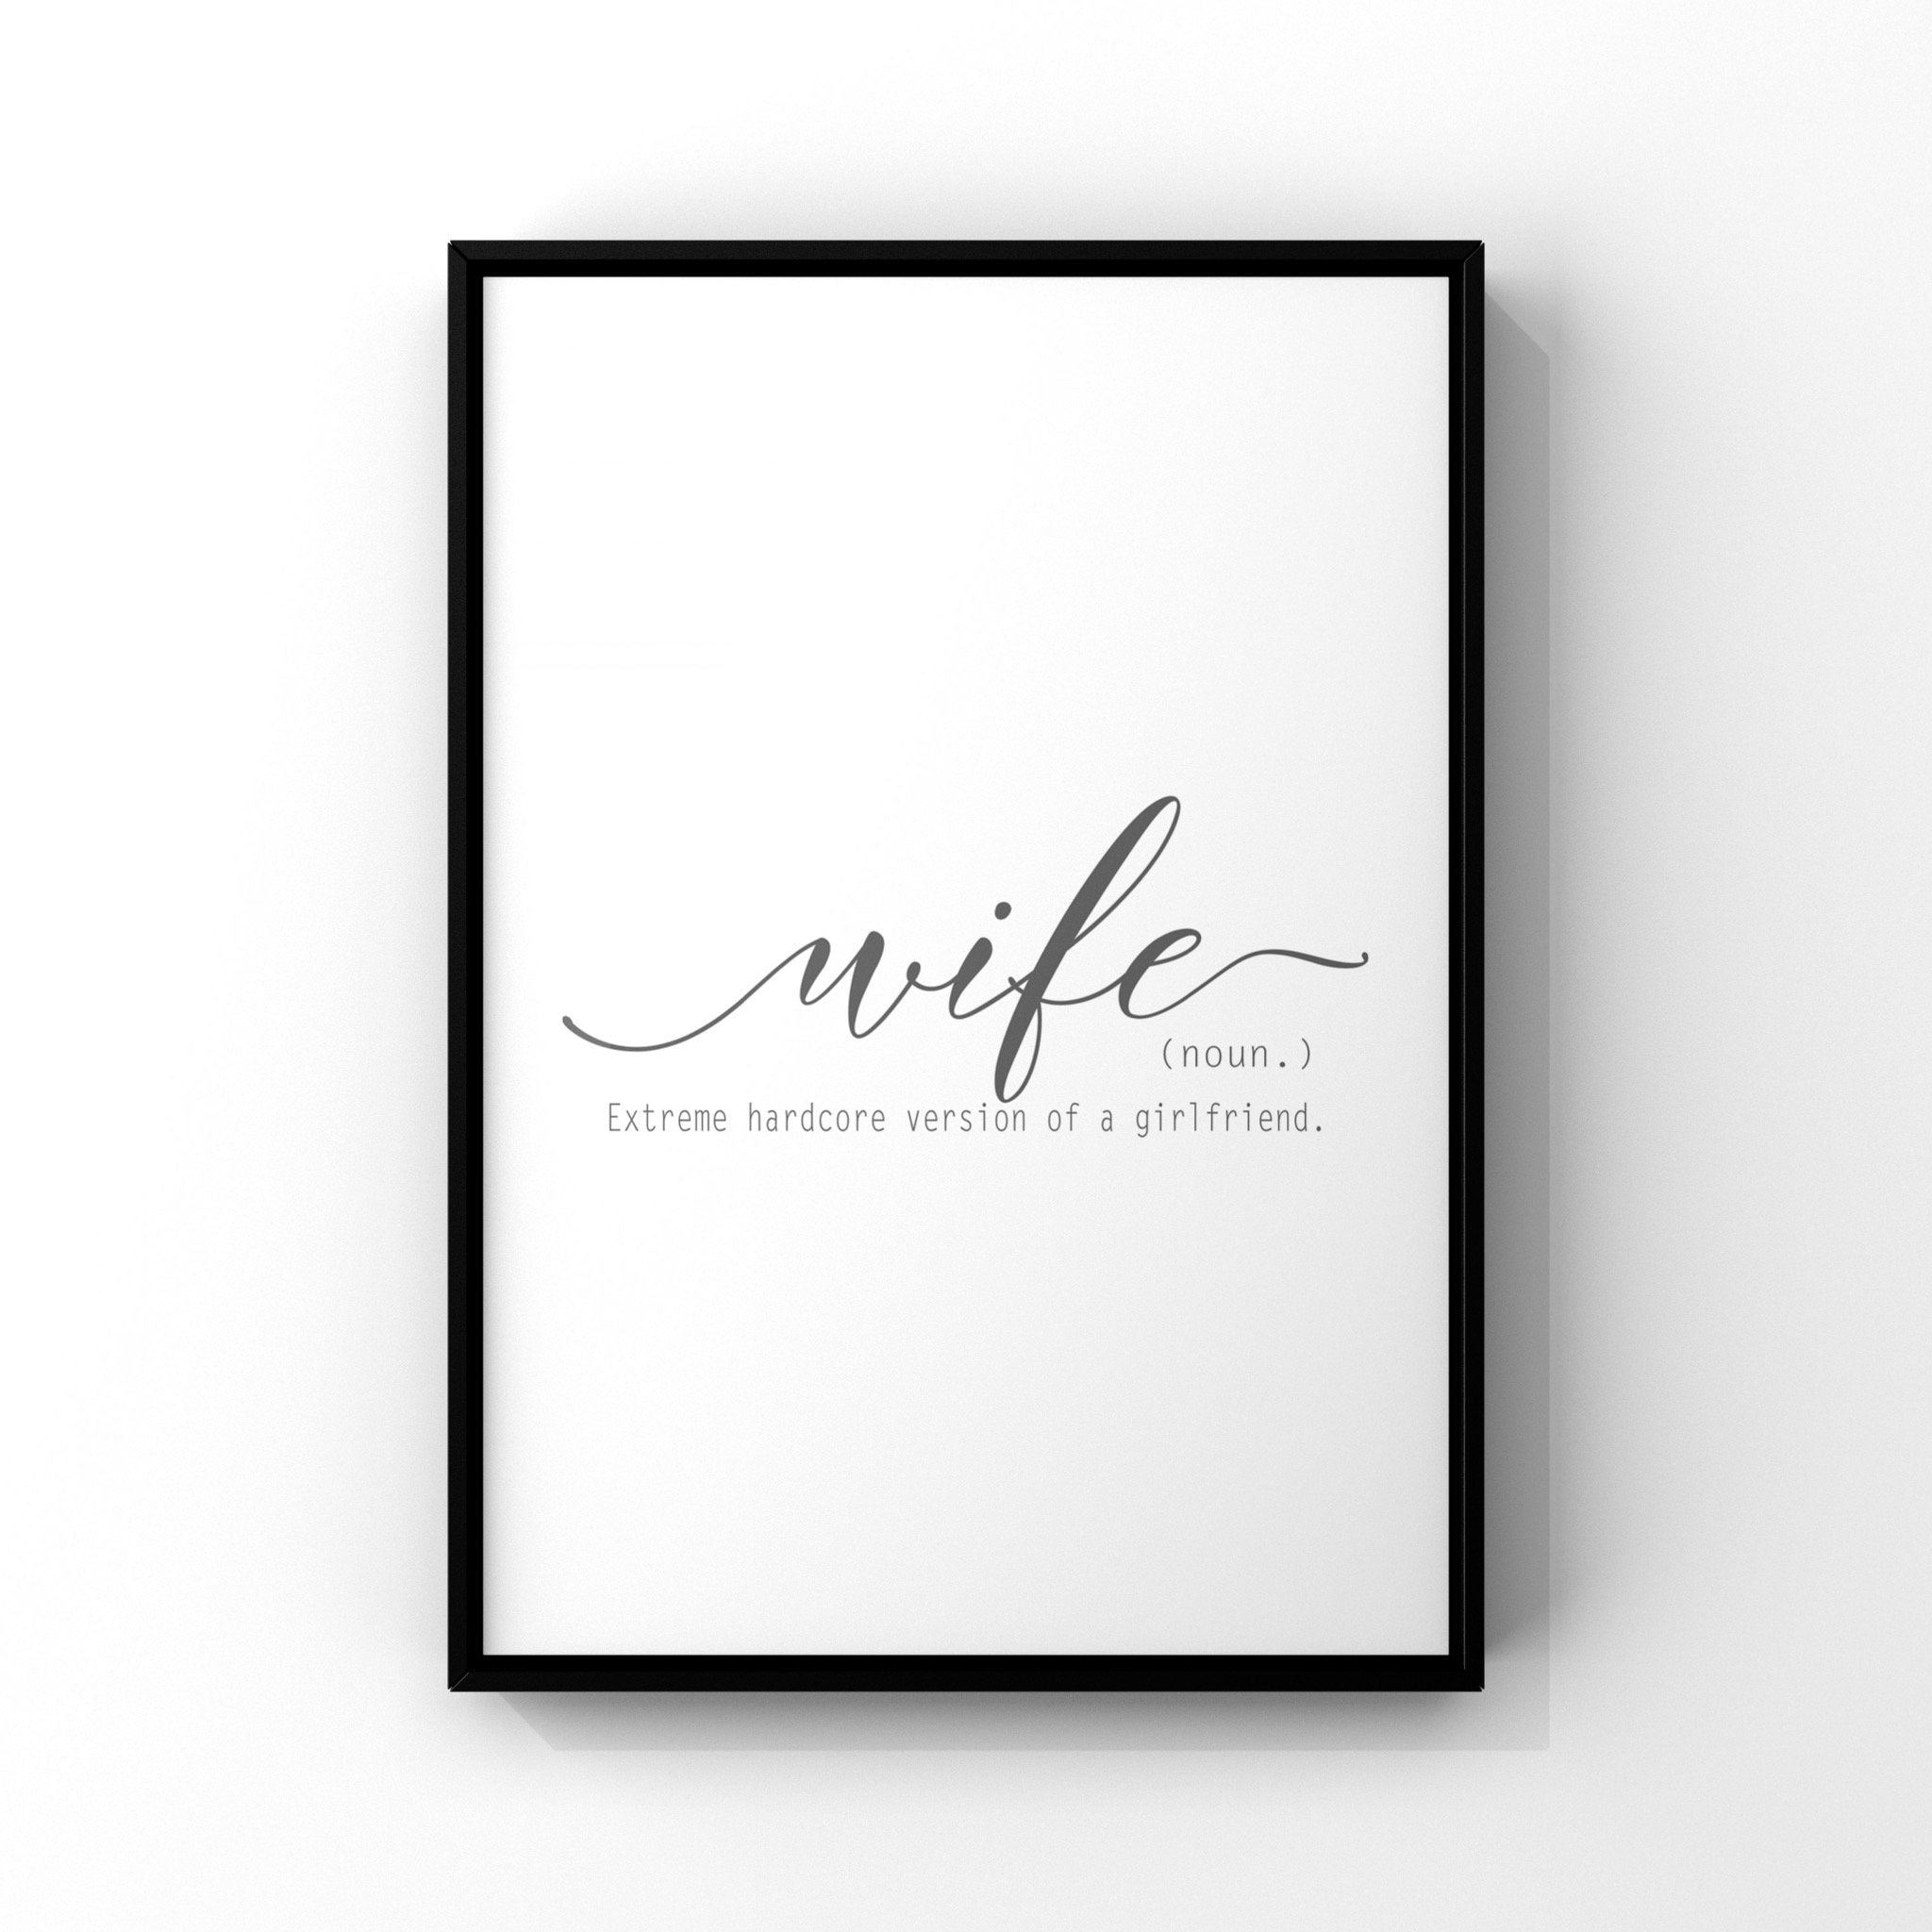 Set of 2 Husband and Wife Definition prints